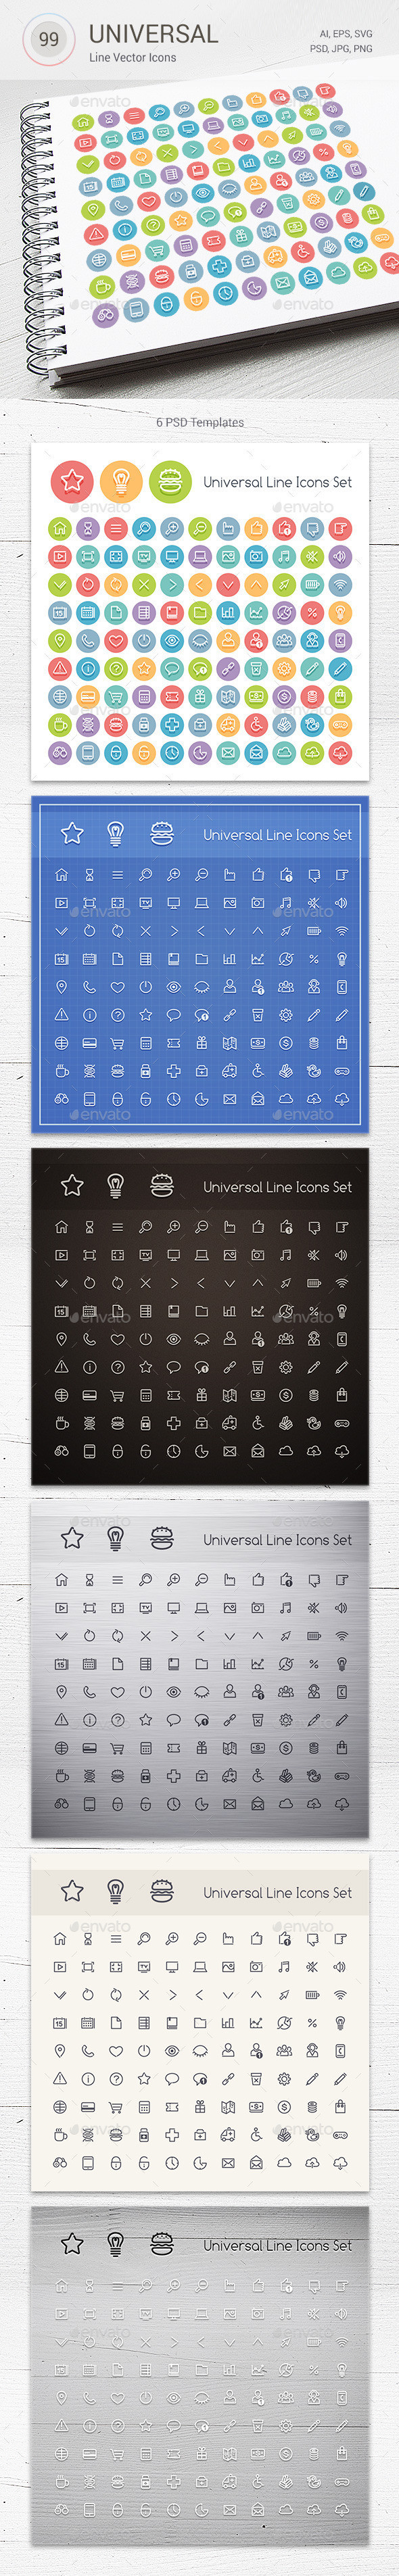 Universal icons pack 590 01